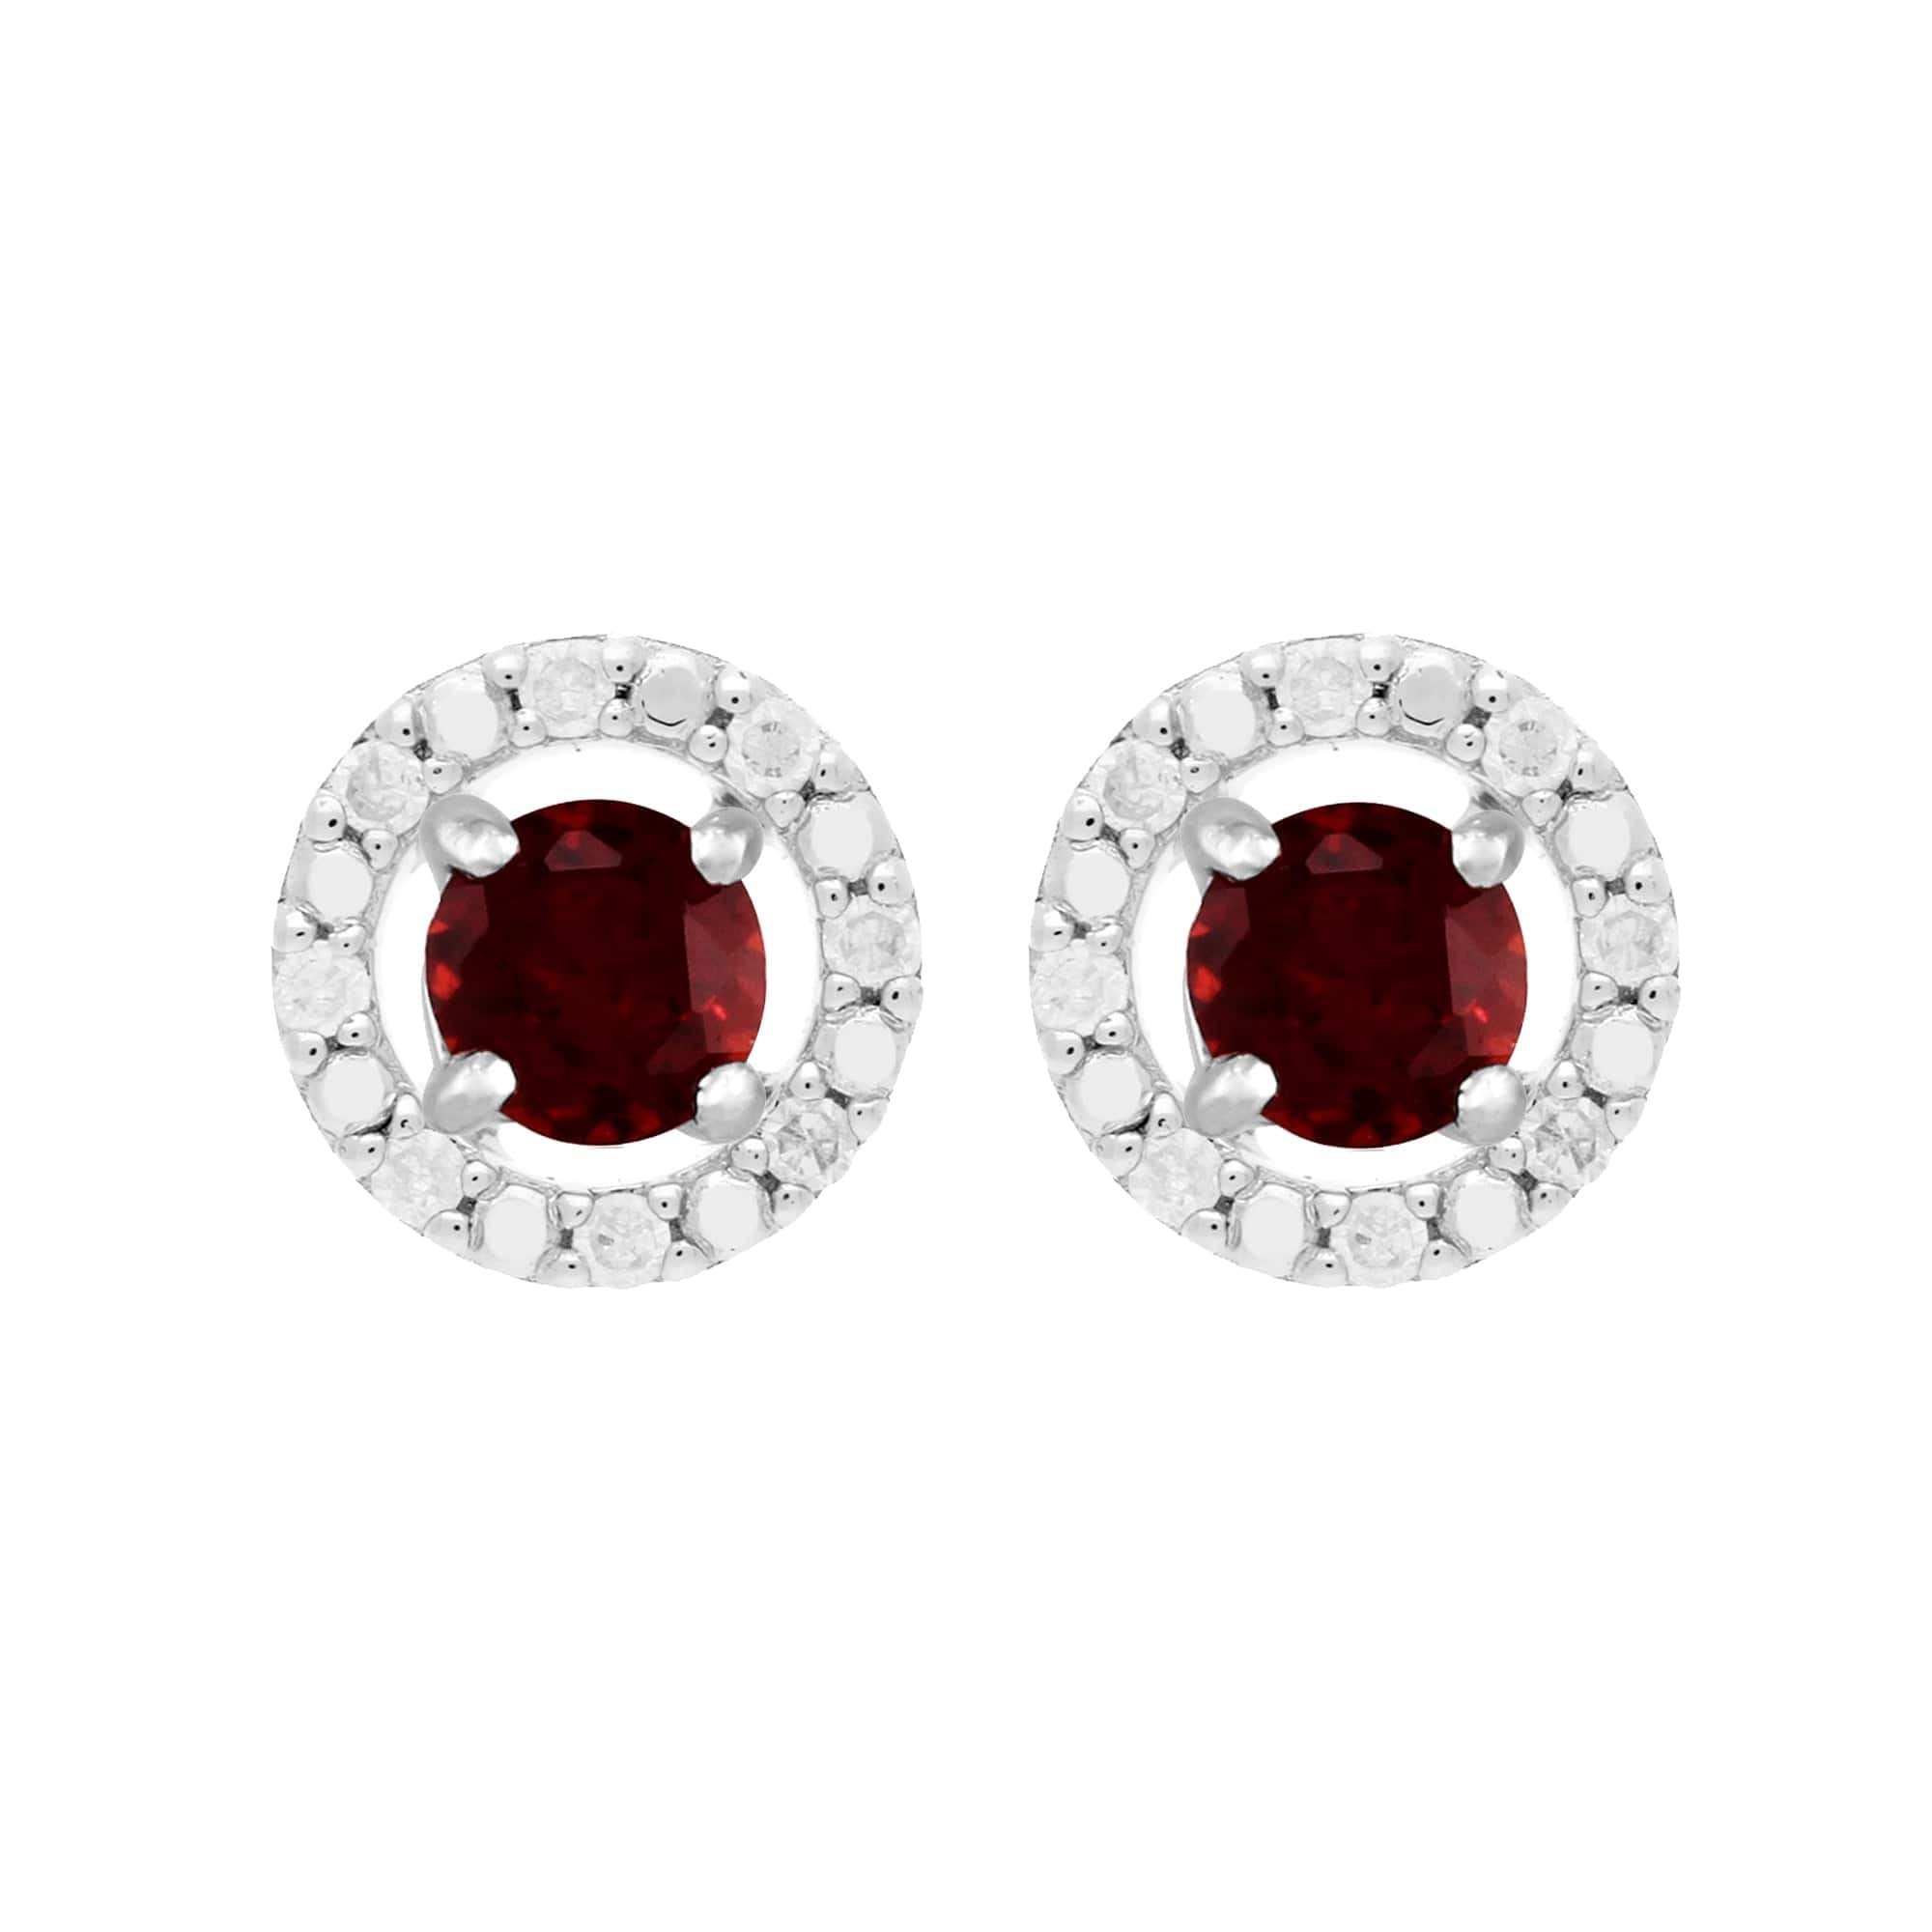 117E0031109-162E0228019 Classic Round Garnet Stud Earrings and Detachable Diamond Round Ear Jacket in 9ct White Gold 1